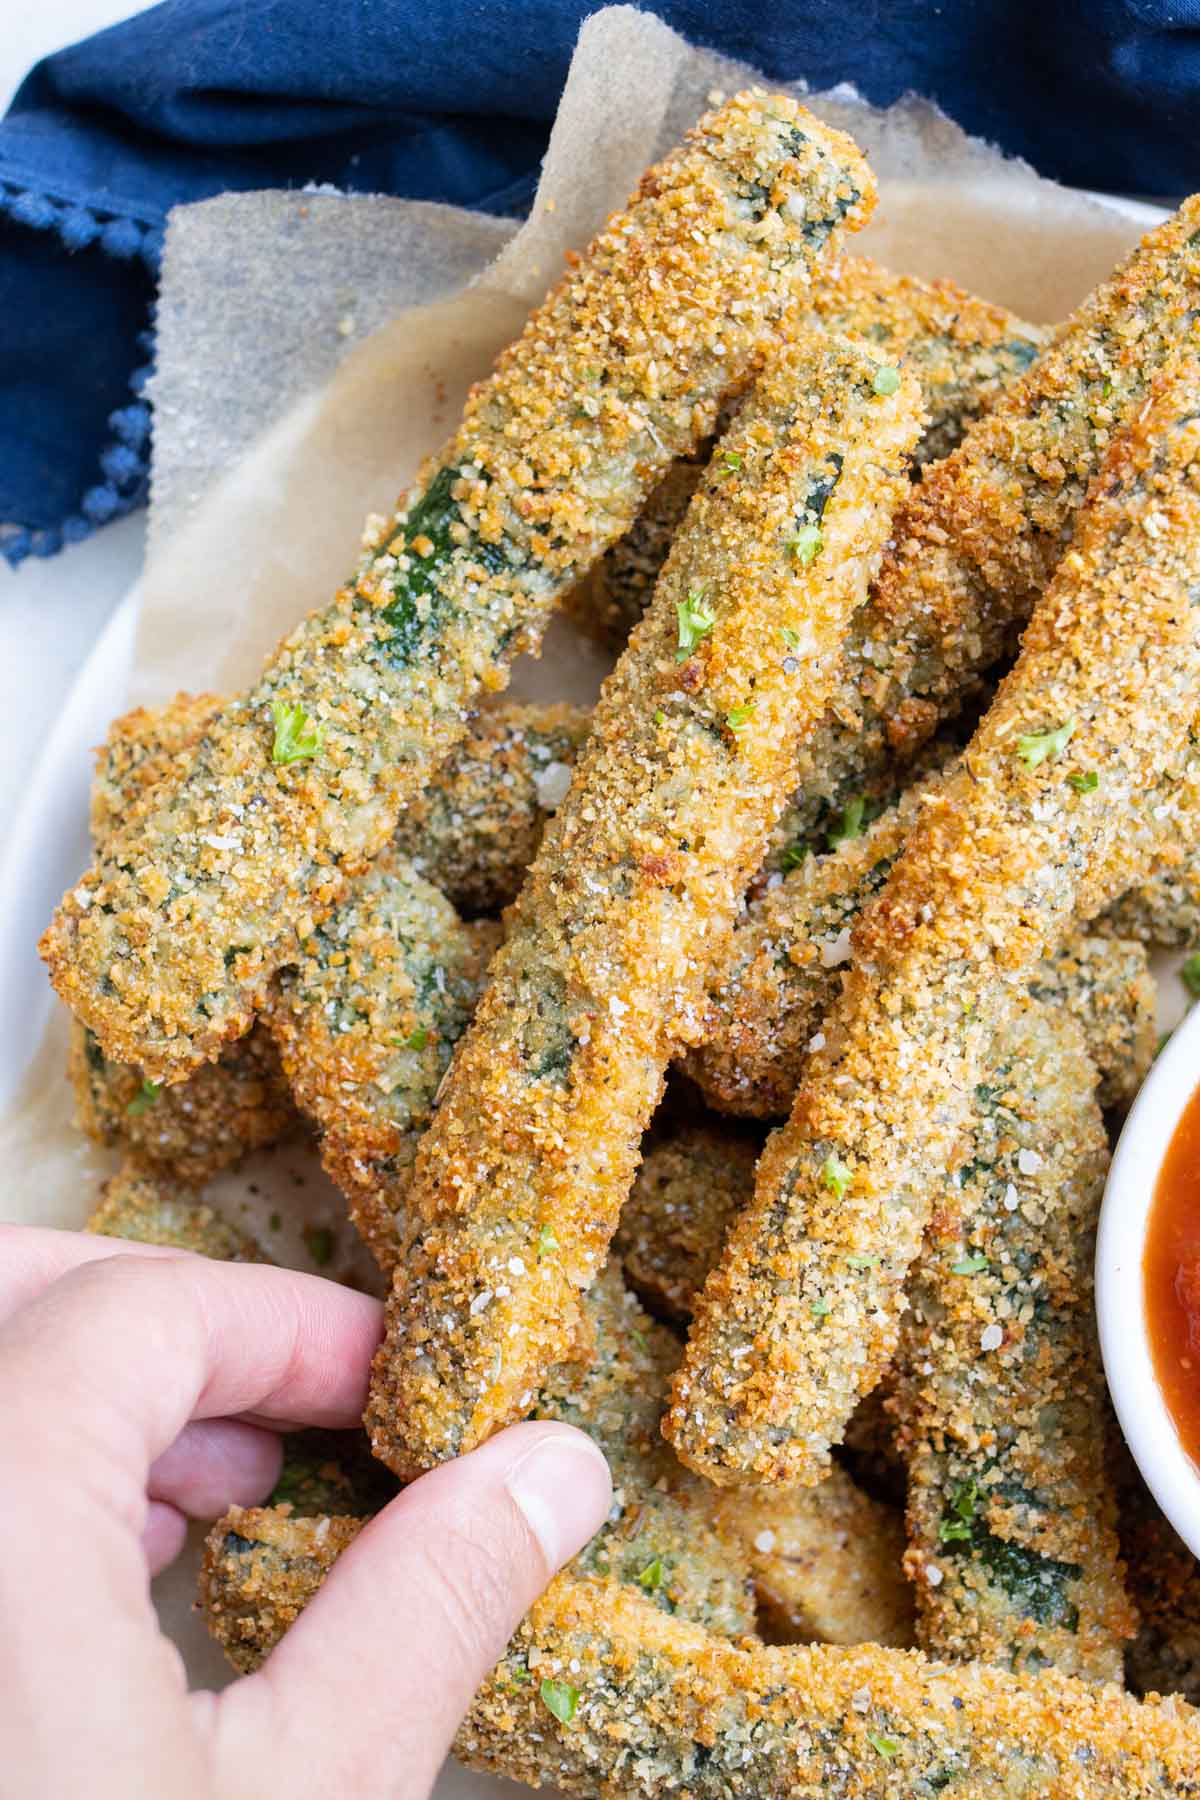 Healthy, vegetarian zucchini fries on a plate.